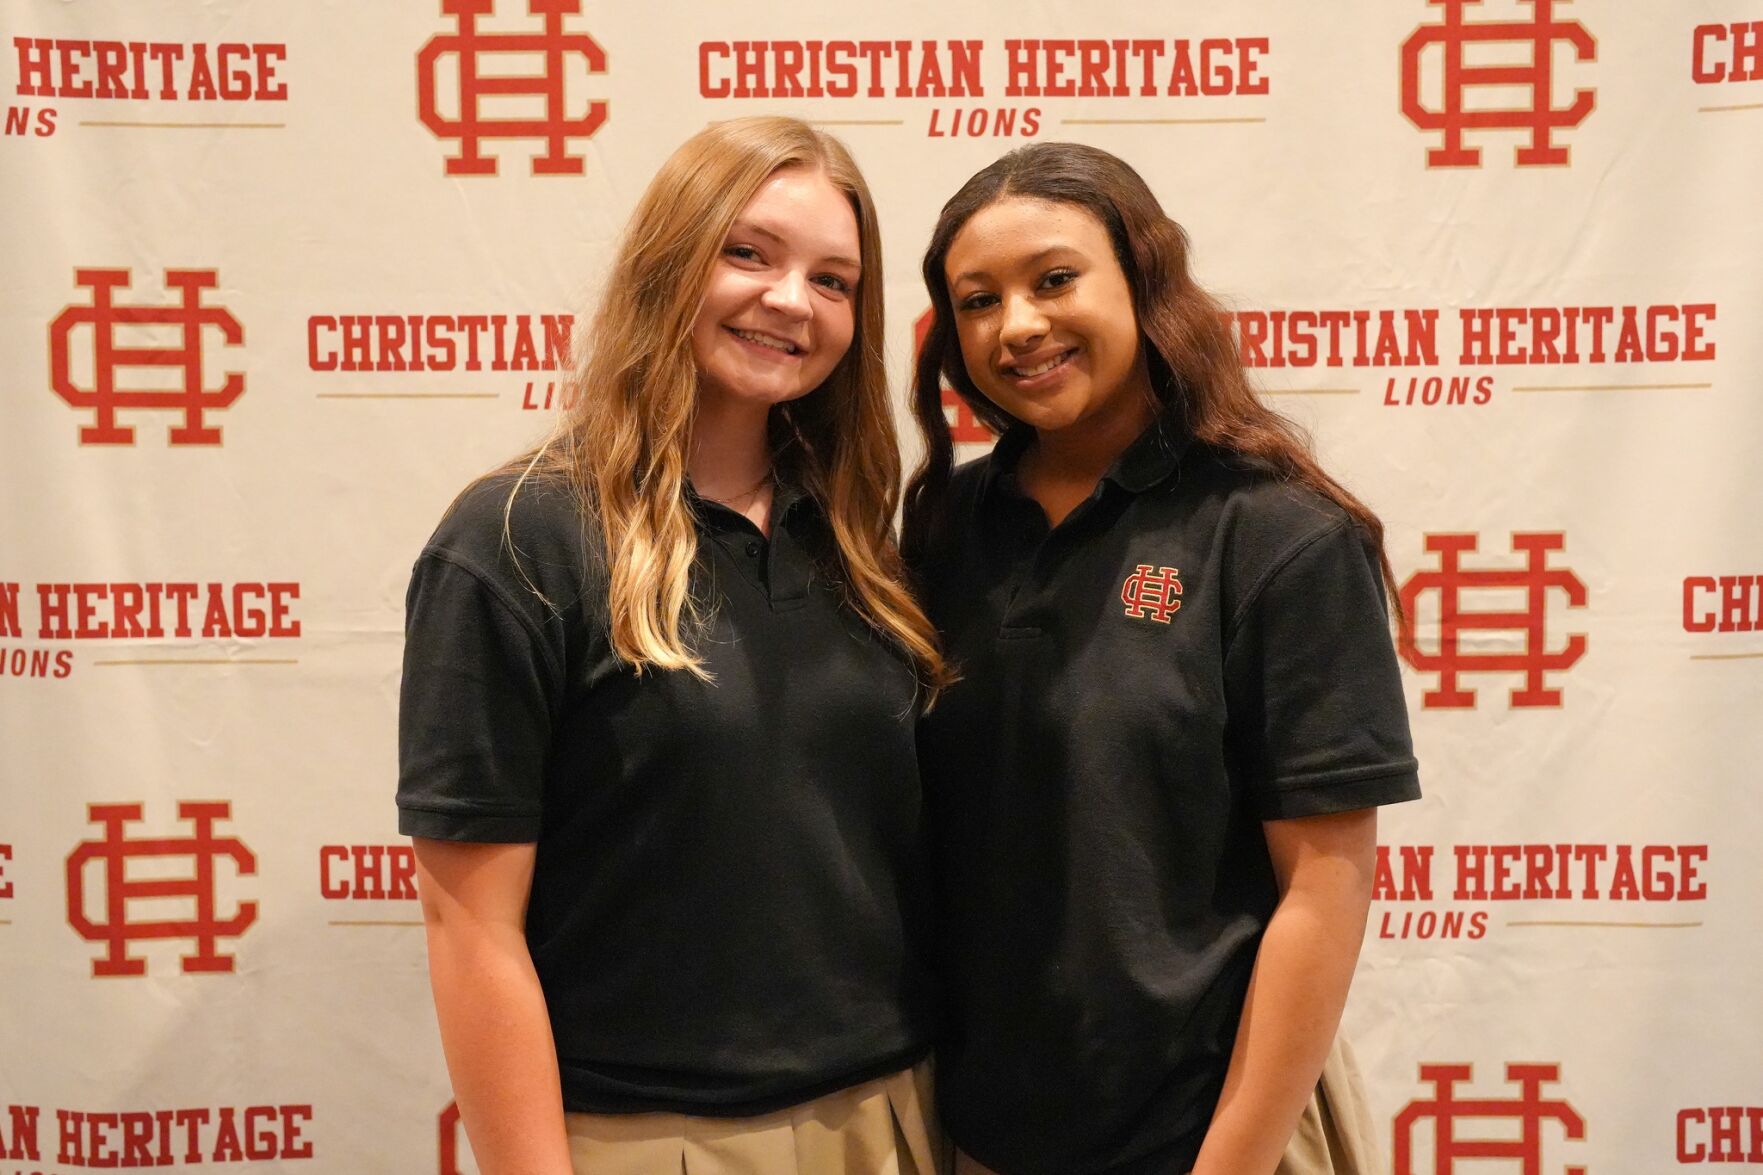 Christian Heritage duo makes college decision; Stallion to play basketball at Brenau, Strickland goes beach volleyball at Truett McConnell